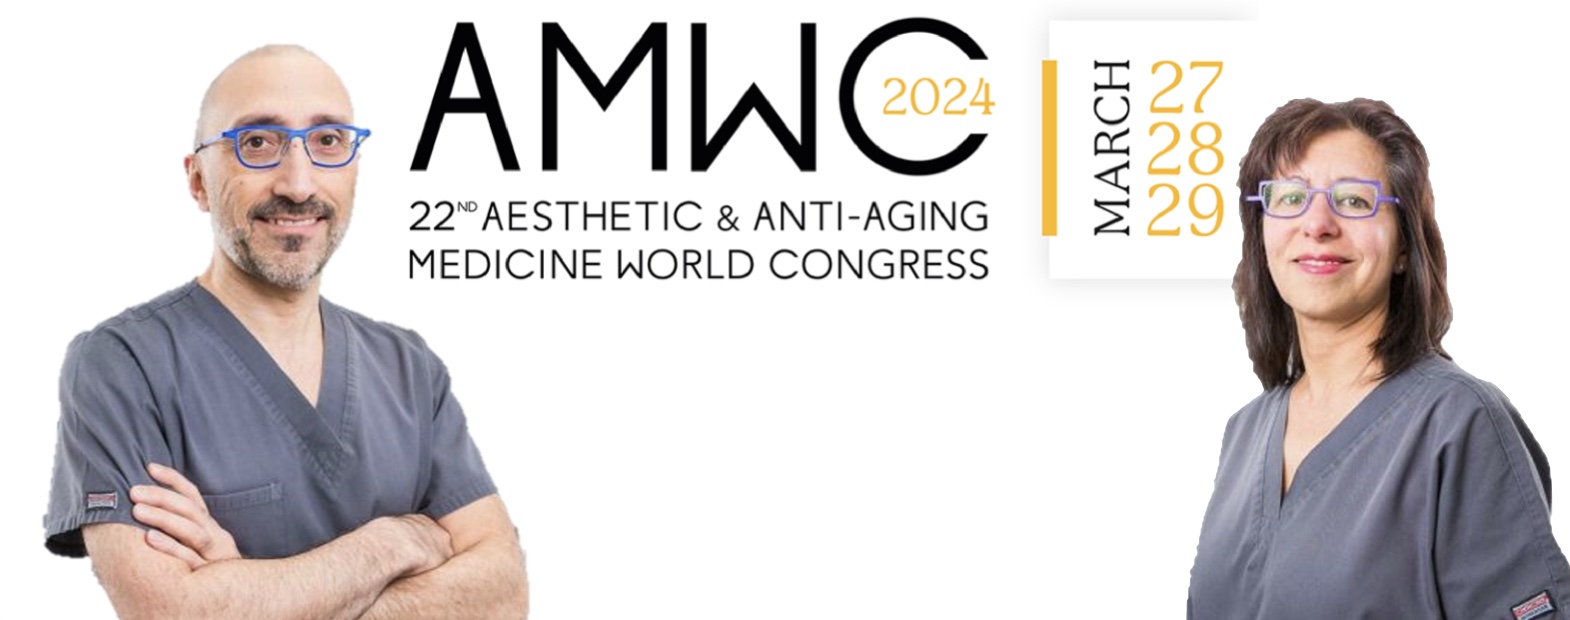 HairClone Medical Director and Clinical Partner Dr. Bessam Farjo Presented “Hair Follicle Banking” at the 22nd AMWC Conference in Monaco